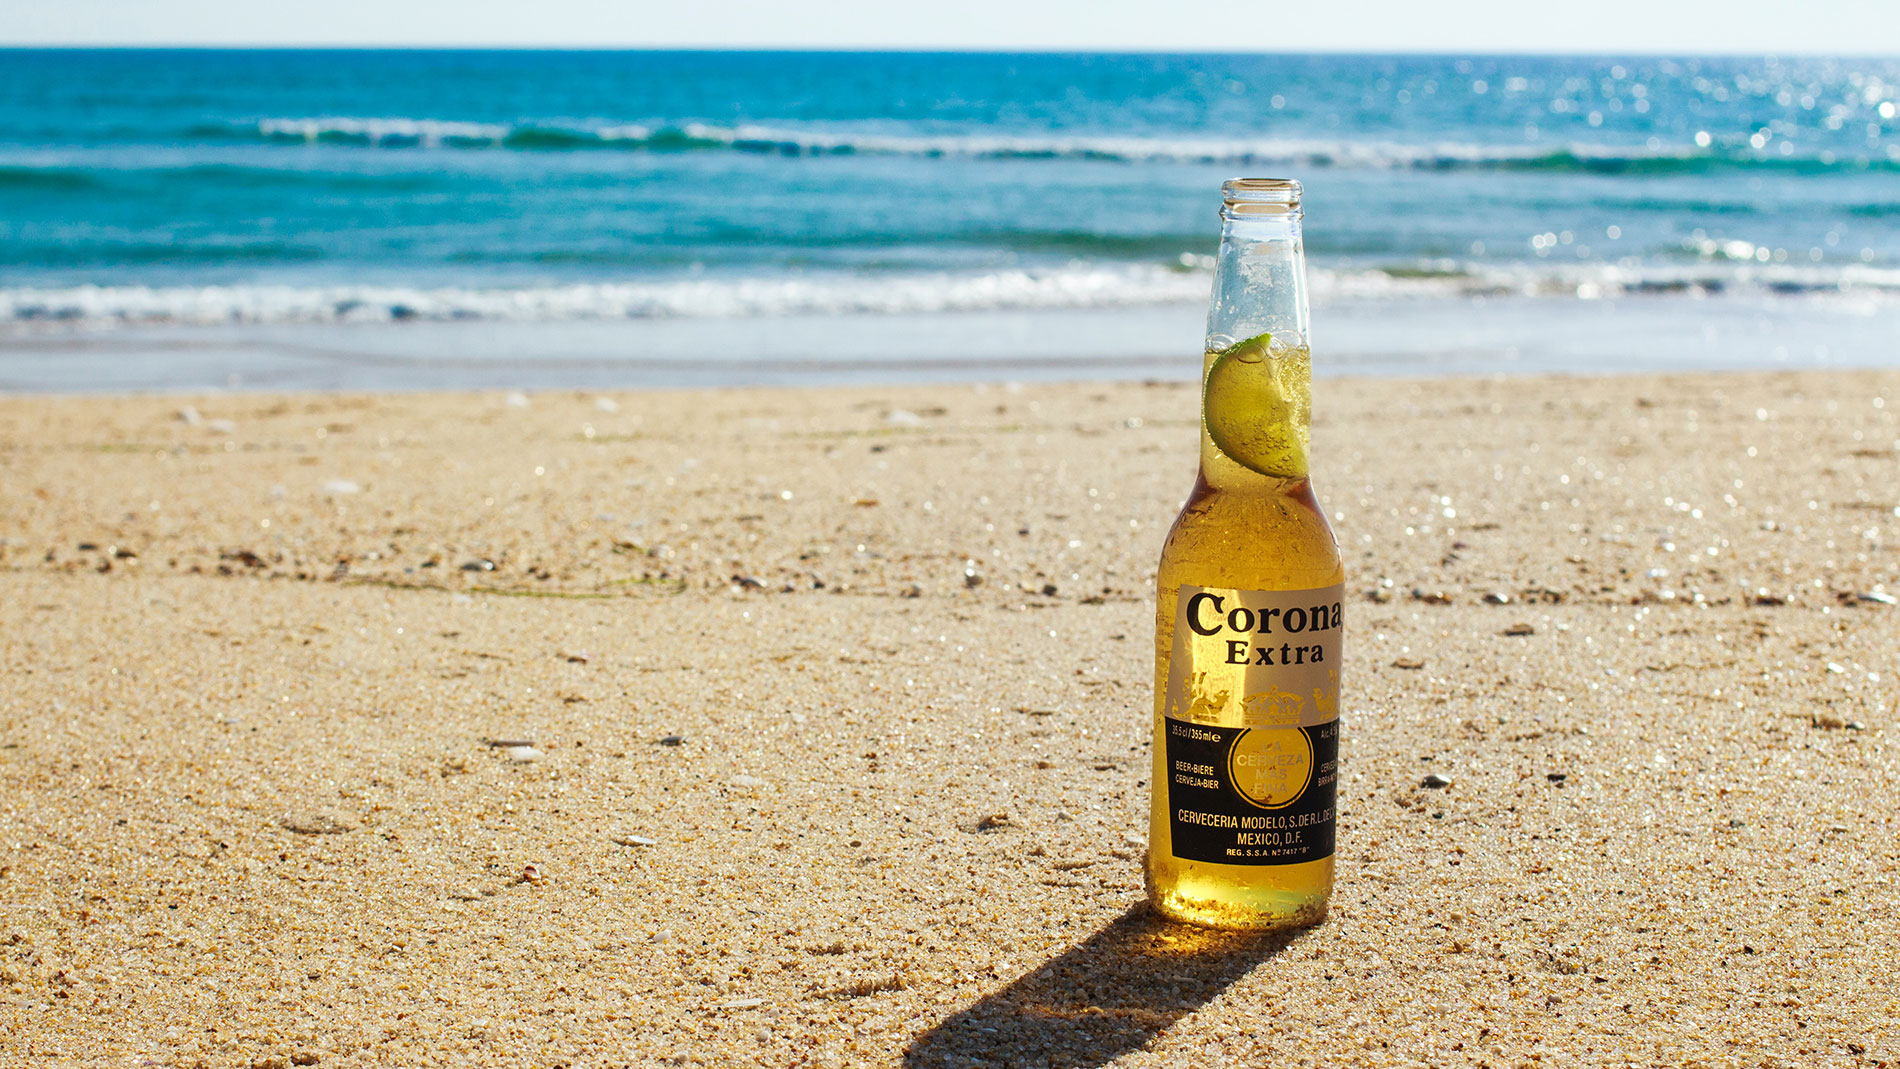 corona bottles can be crushed into sand